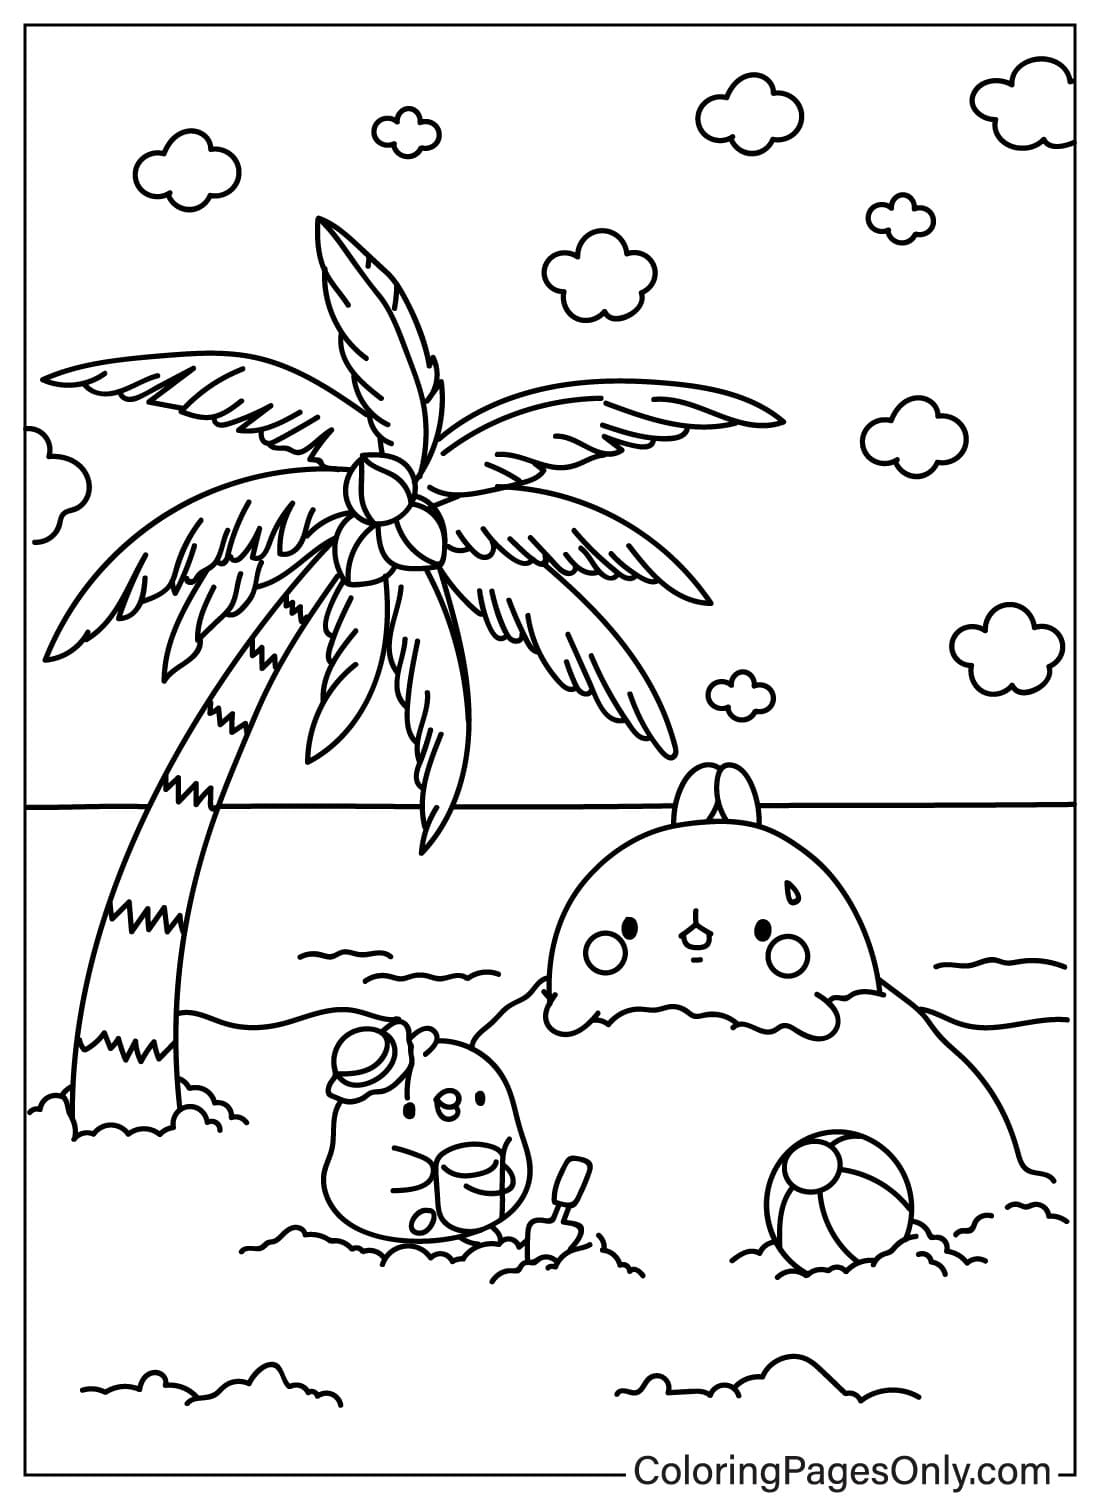 Molang and Piu Piu Play Sand in the Sea from Molang